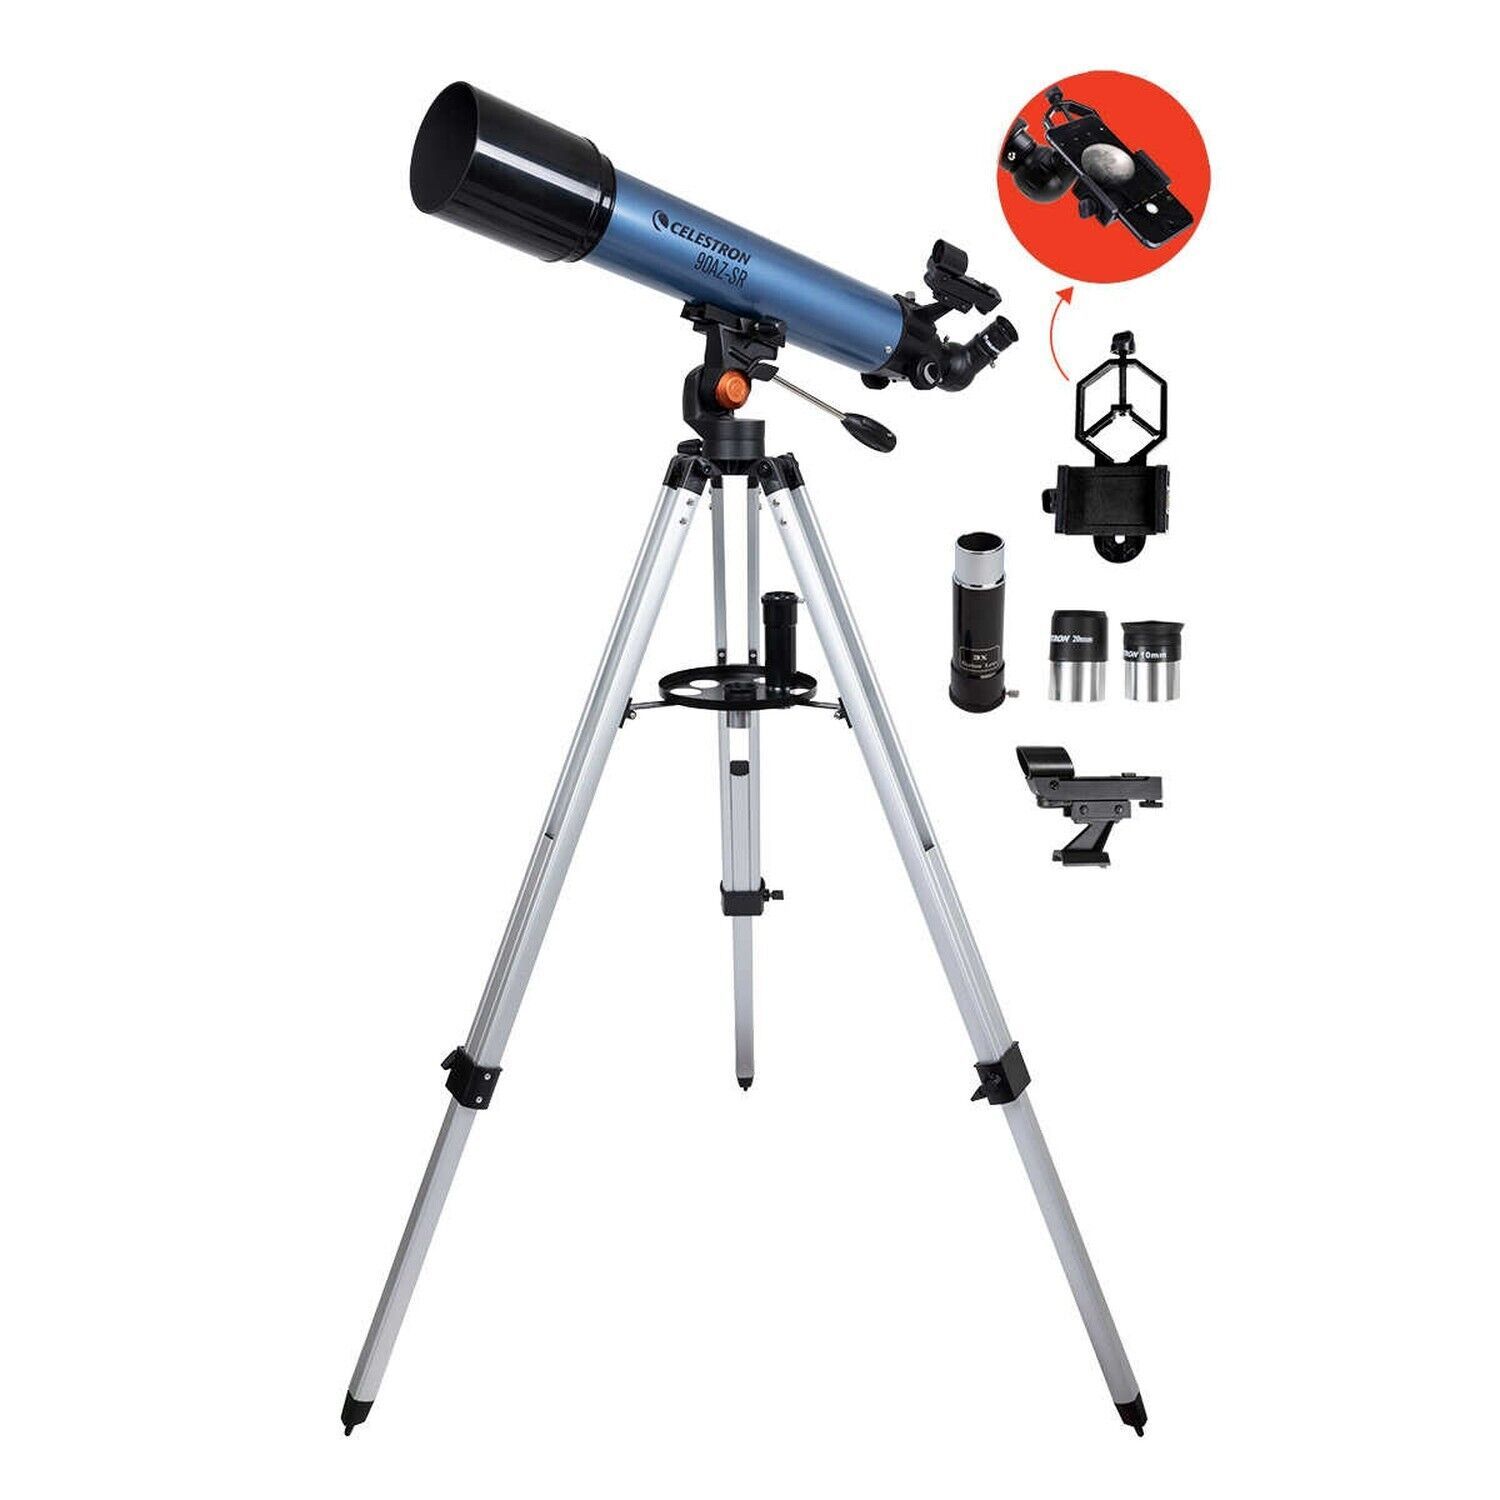 TELESCOPE CELESTRON TELESCOPES FOR BEGINNERS ADULTS TO SEE PLANETS REFRACTOR NEW - $233.99